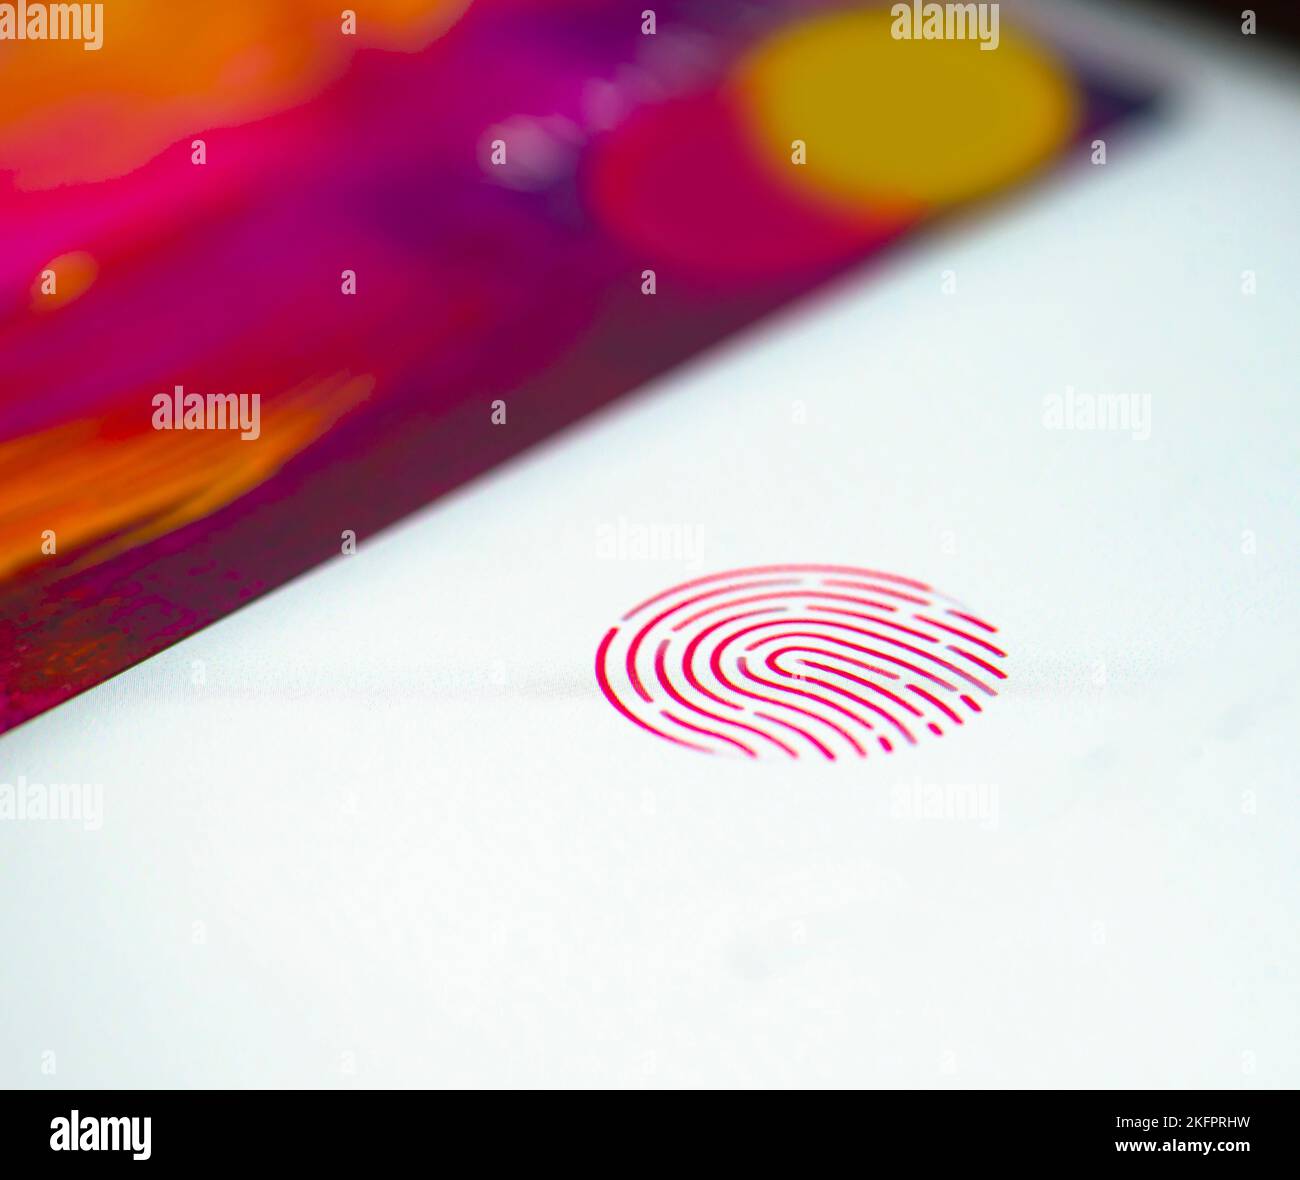 Fingerprint image on the display of the device, paying internet Stock Photo